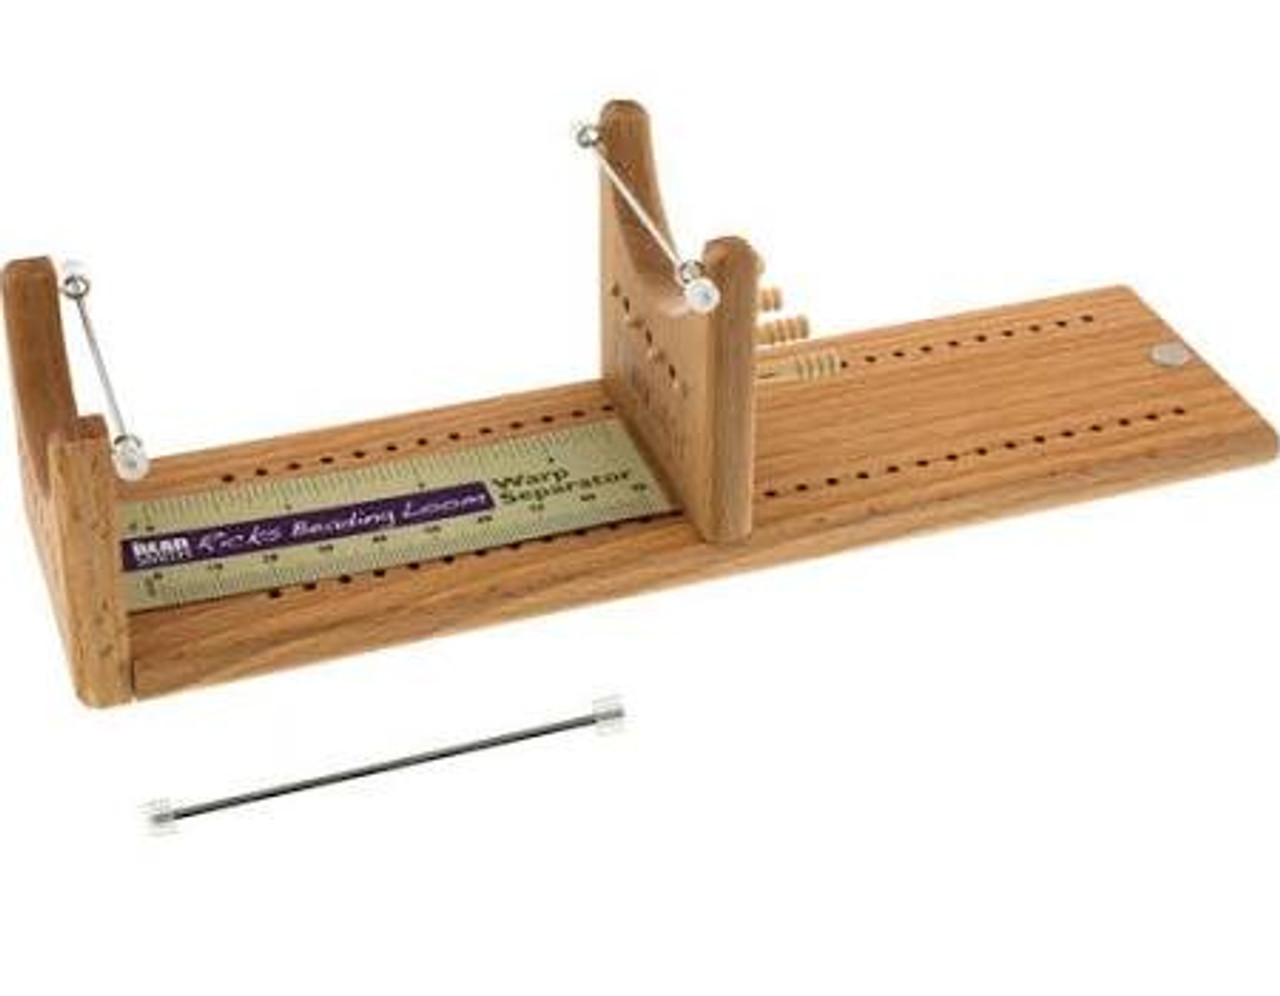 1 X Ricks Beading Loom Kit - The Only Loom with Two Warp Threads to Deal  with When Your Project Is Complete